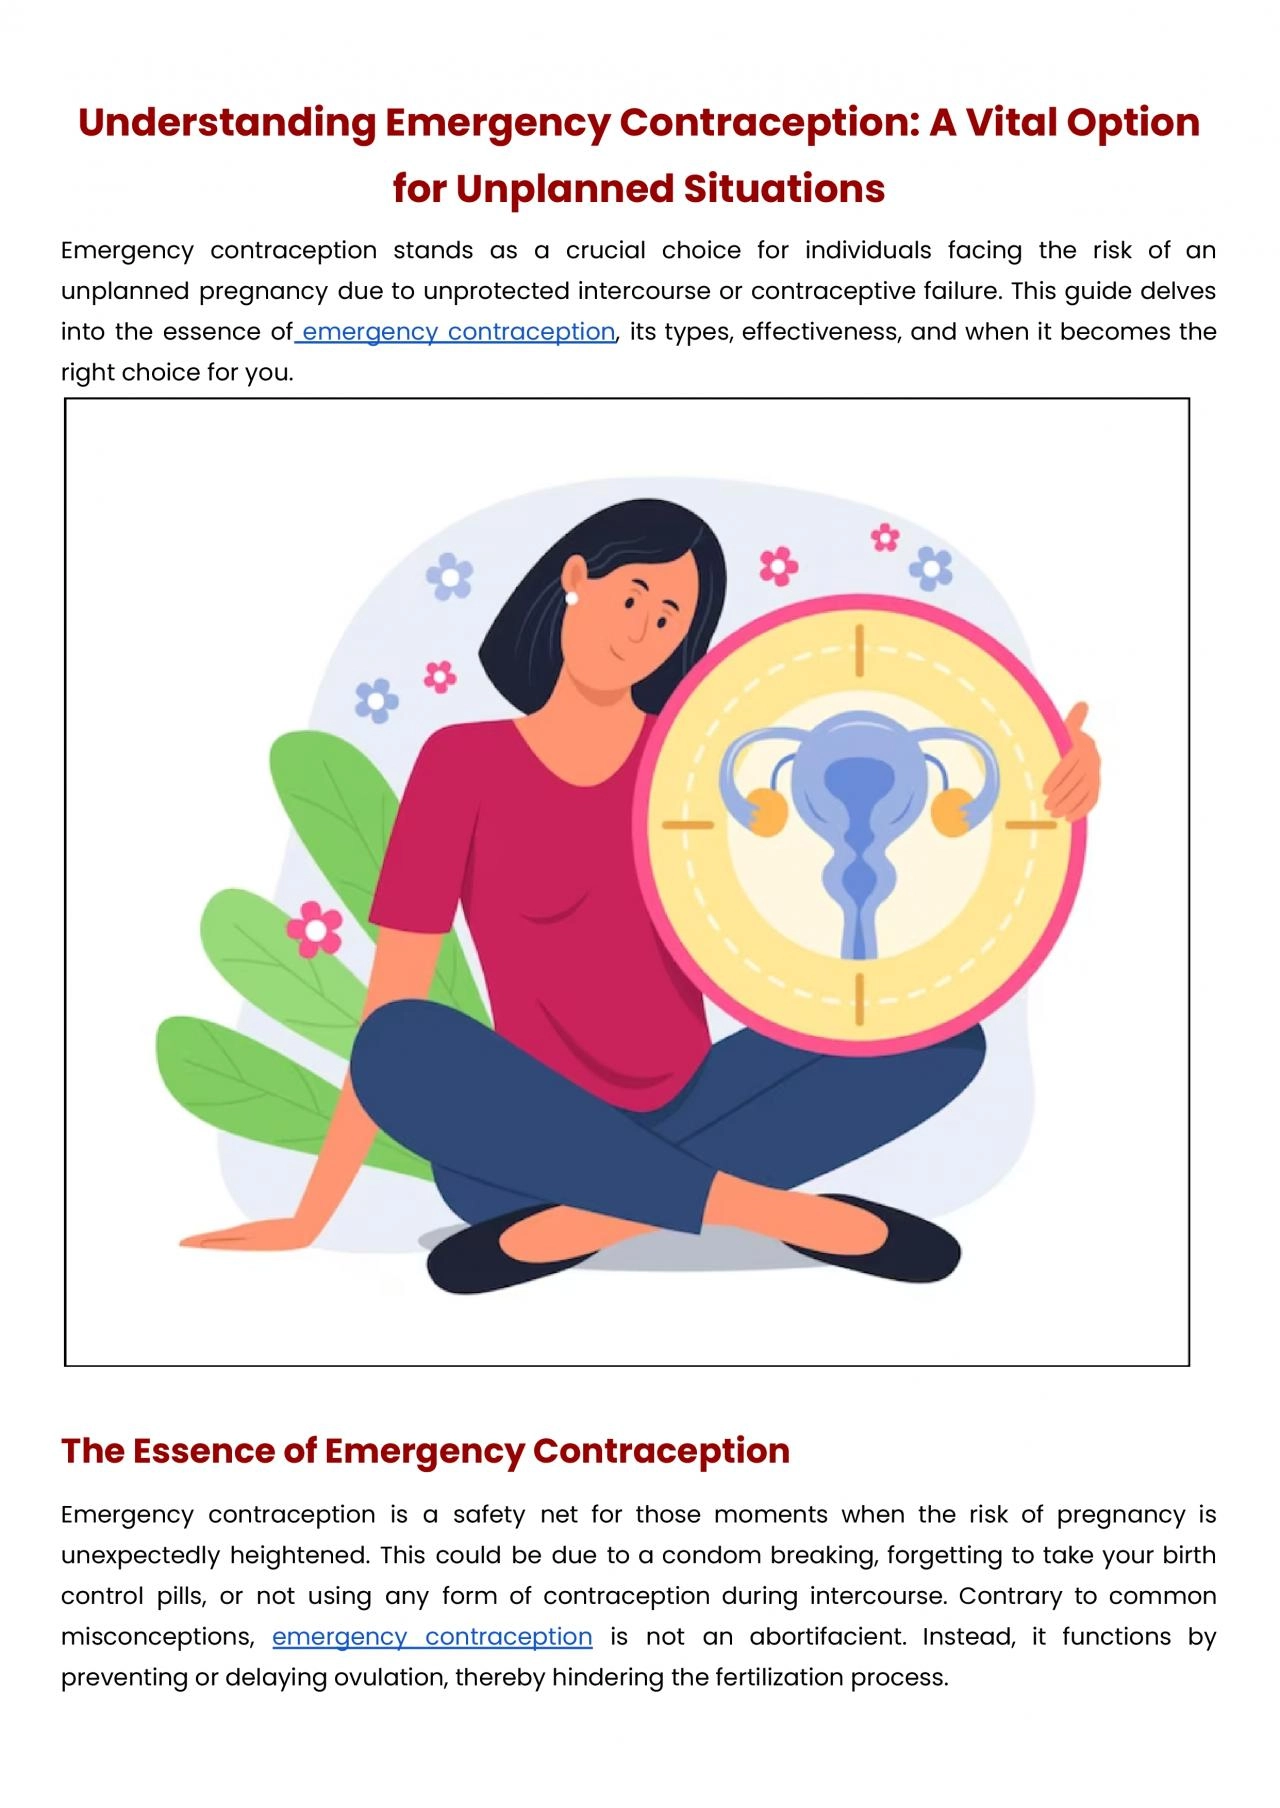 Understanding Emergency Contraception: A Vital Option for Unplanned Situations